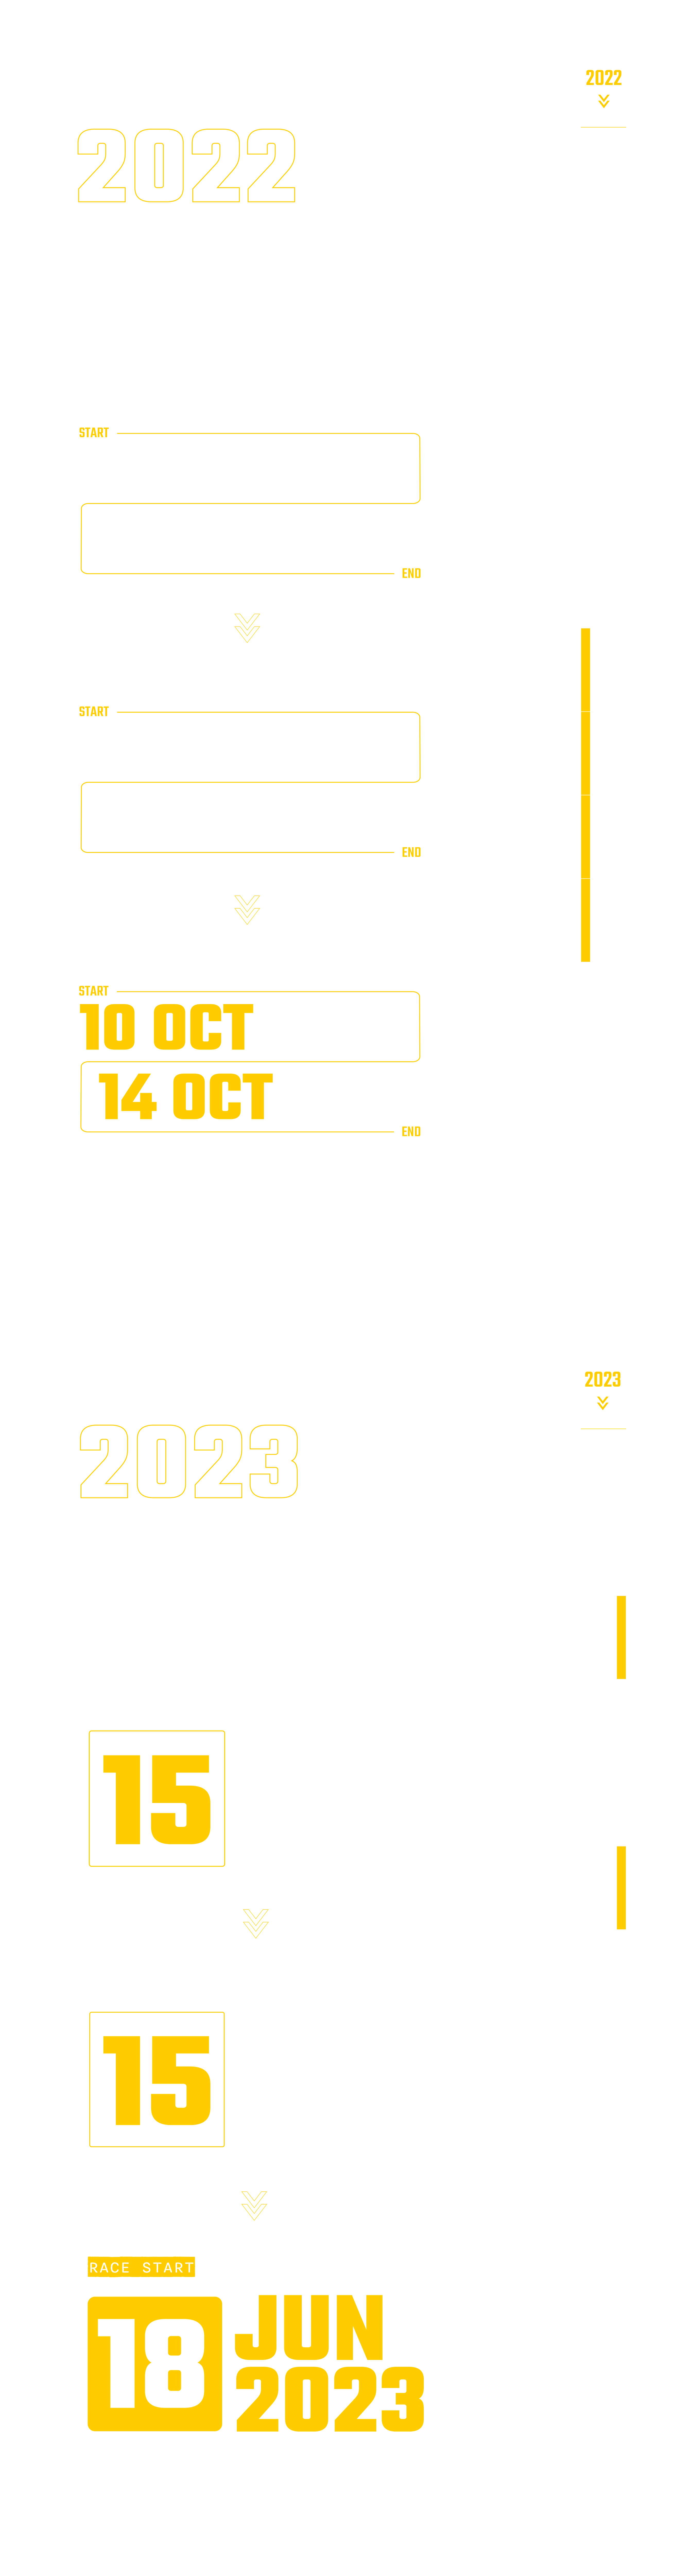 RBX23 infographic timeline mobile